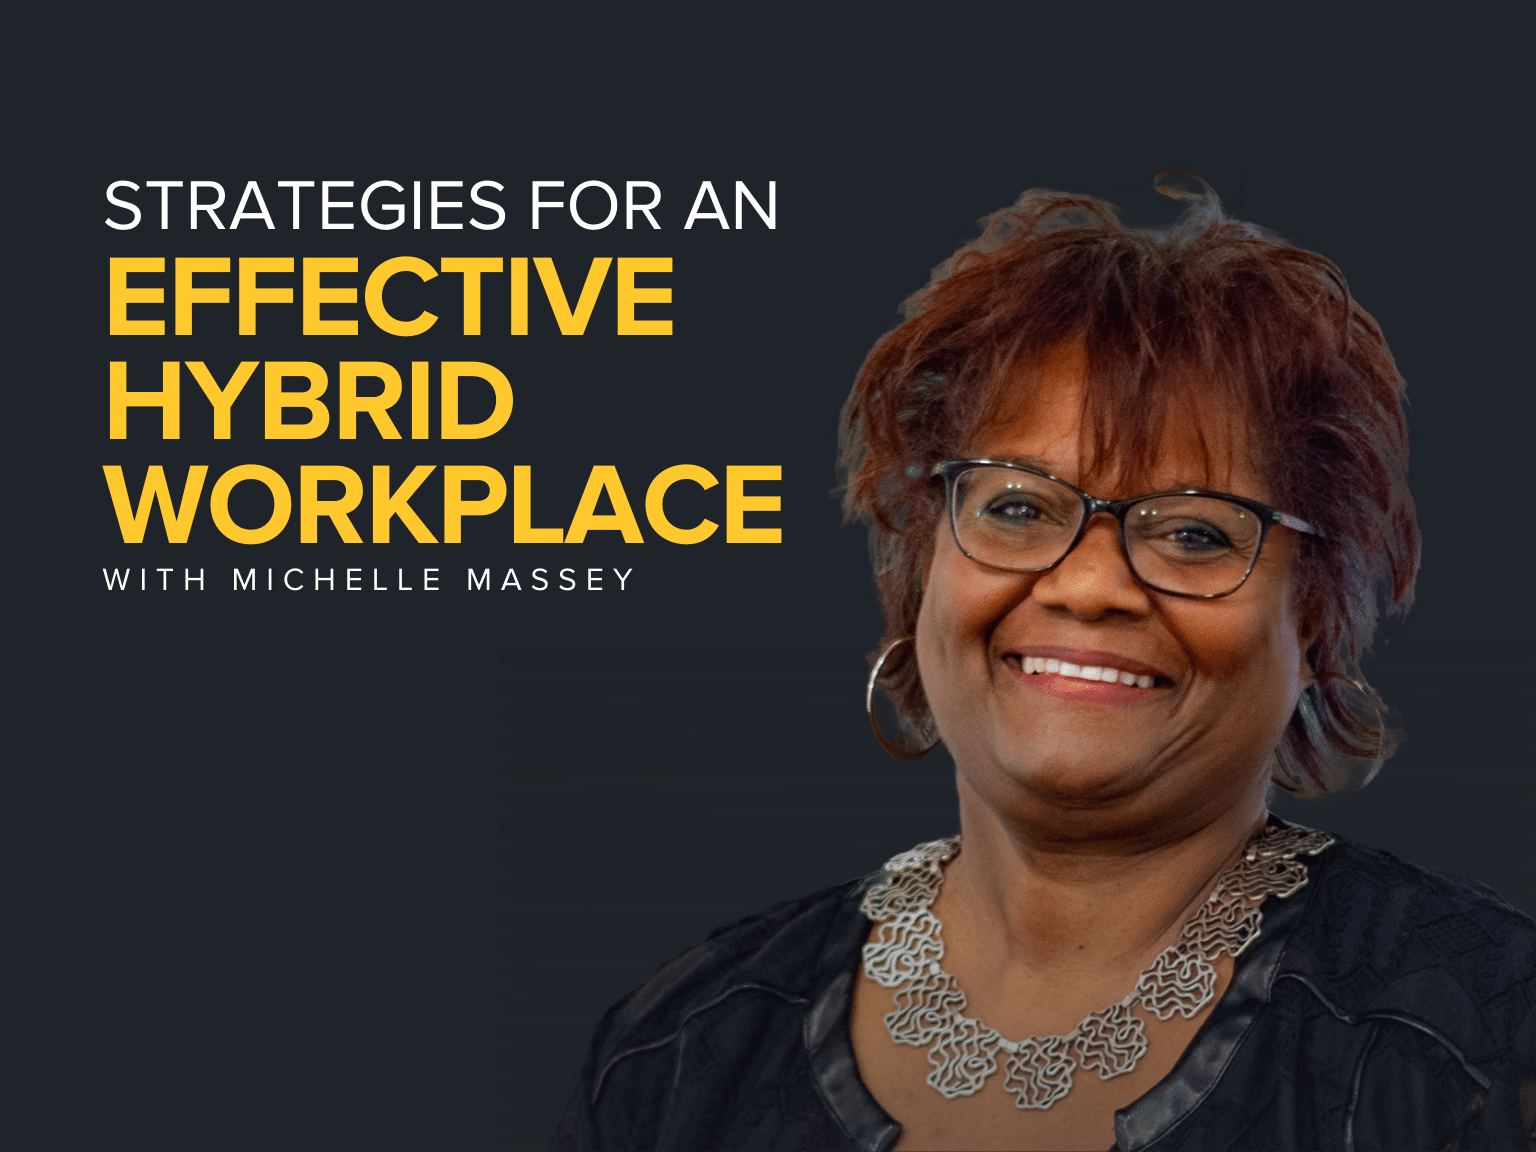 Strategies for an Effective Hybrid Workplace